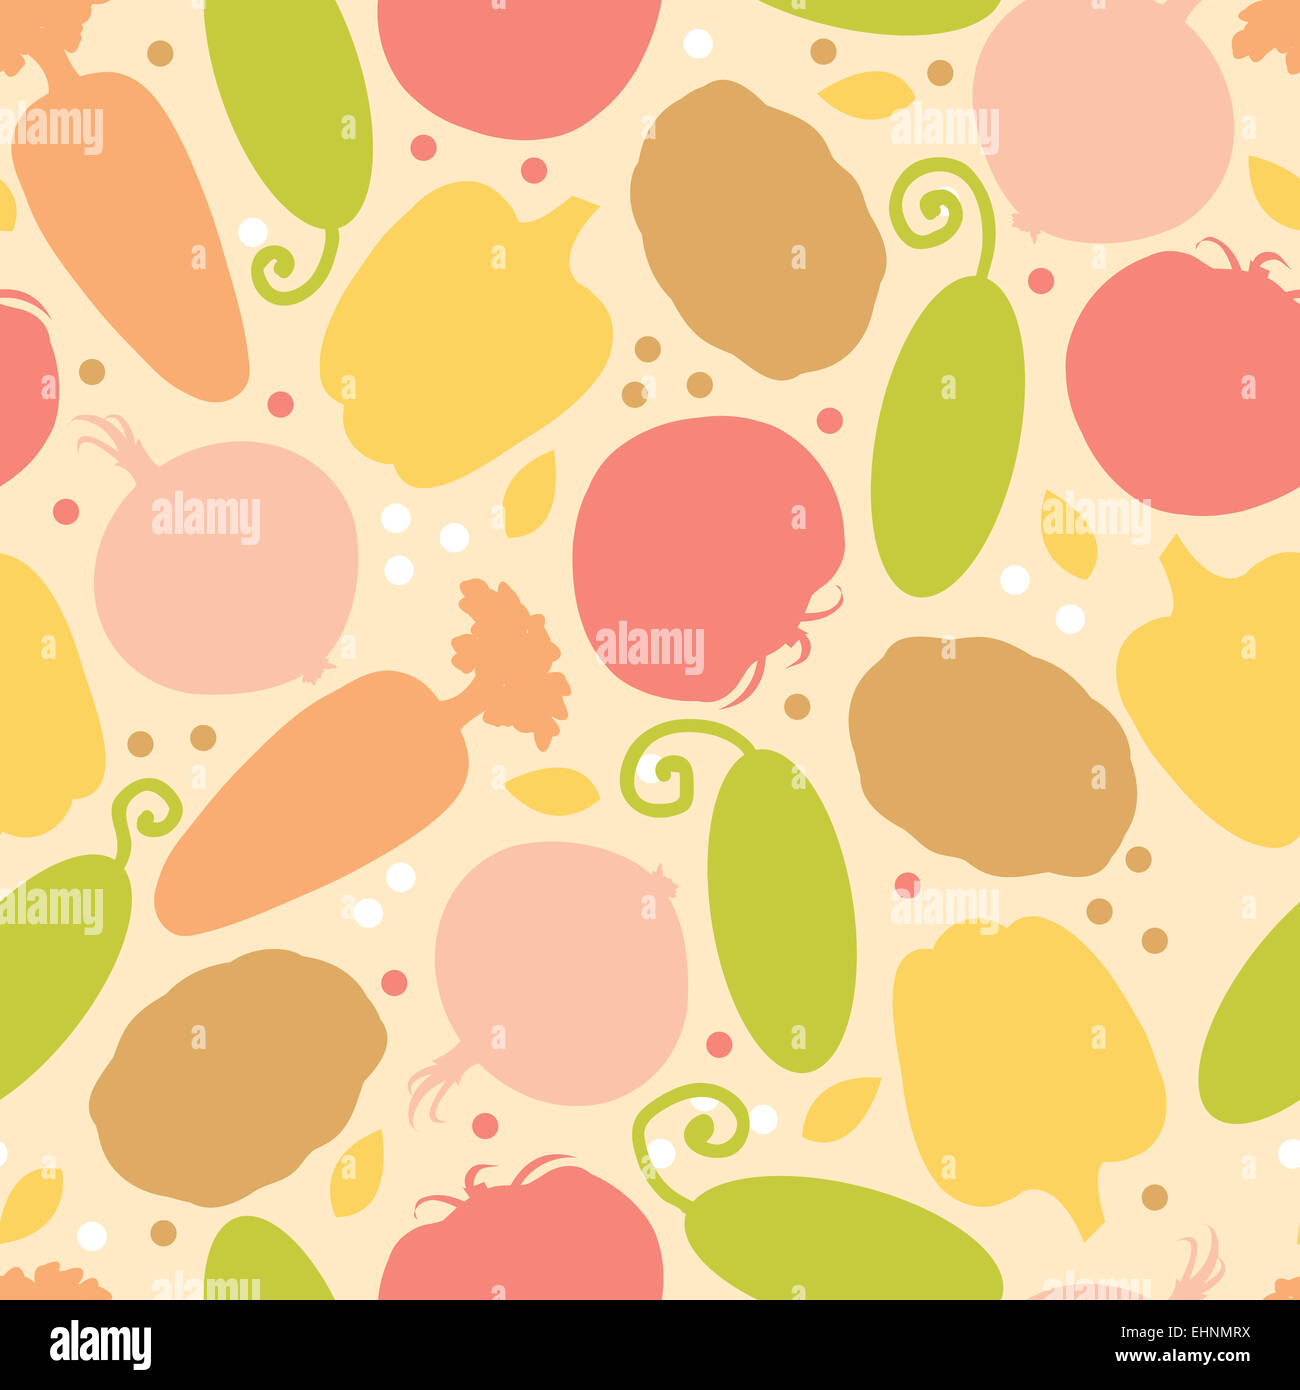 Yummy vegetables seamless pattern background Stock Photo